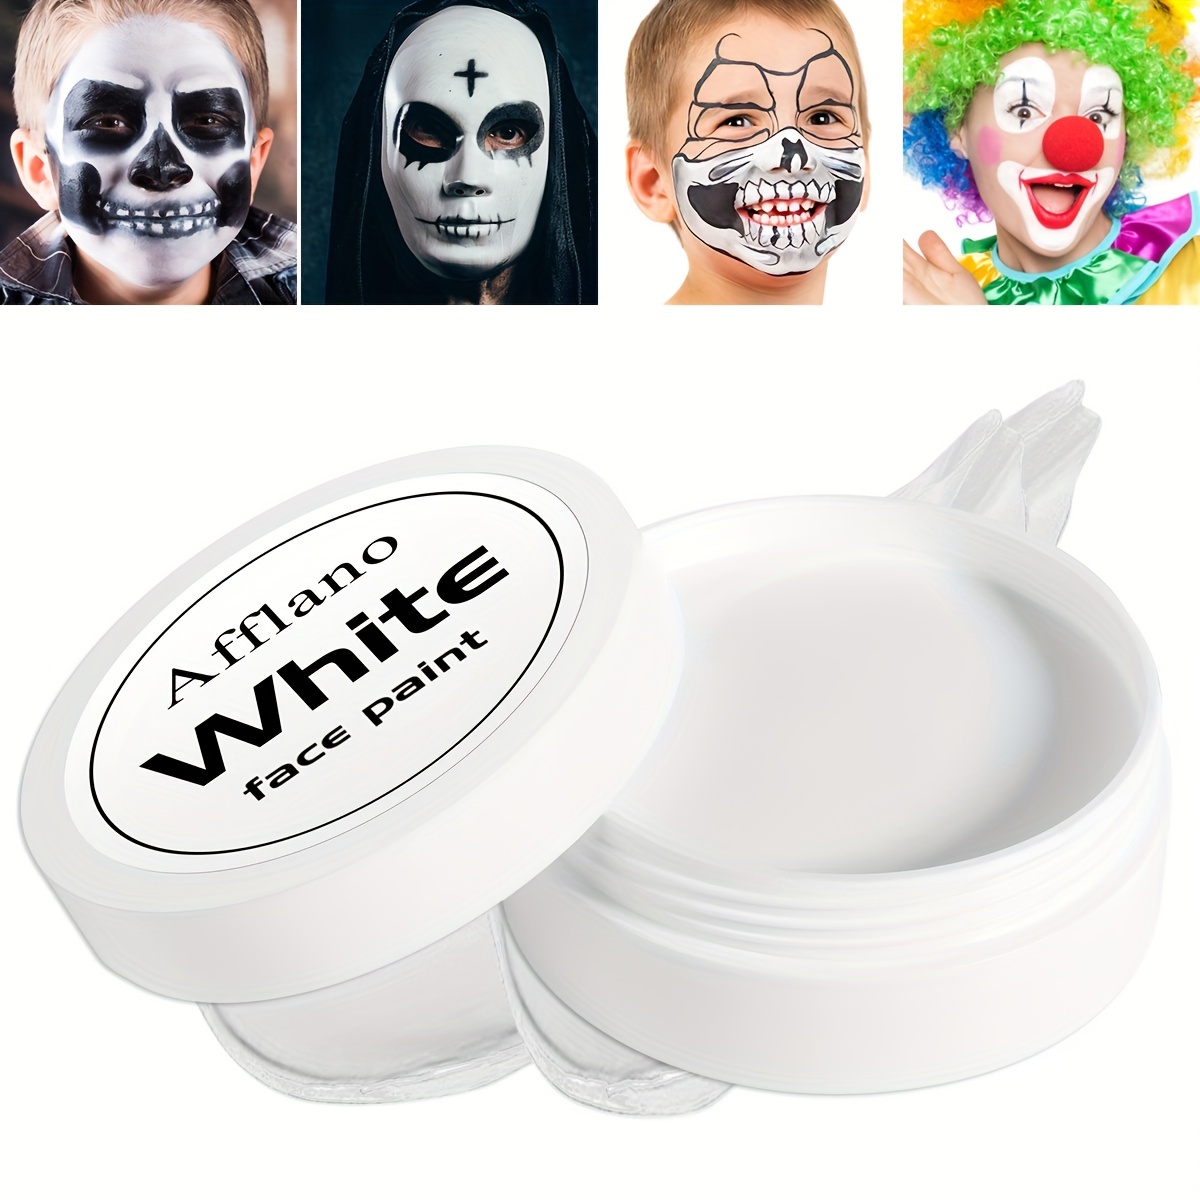  Afflano Scary Clown Makeup Halloween Face Paint Fake Blood  Kit, Red Black White Face Paint for Kid Adult Costume Cosplay, SFX Special  Effect Joker Goth Skeleton Zombie Vampire Makeup Oil